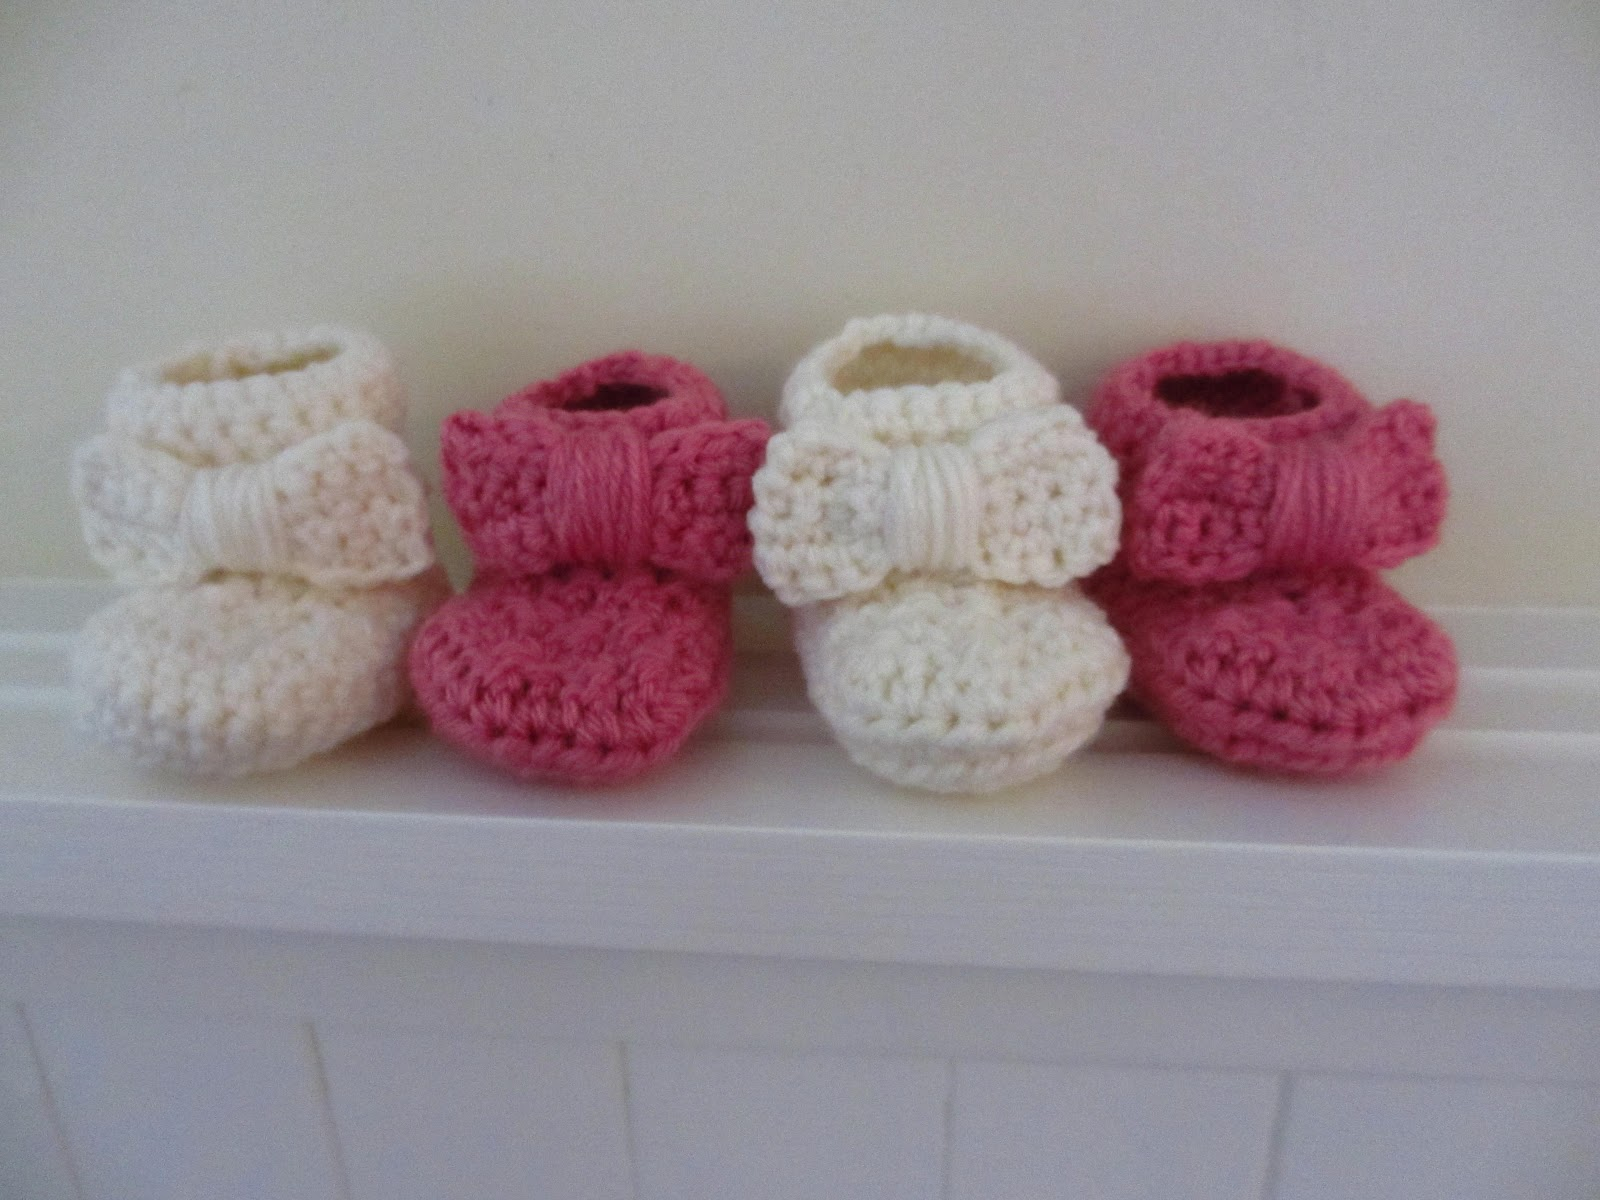 Crochet Baby Booties Pattern Bootie Licious Crochet Patterns 8 Ba Booties Stitch And Unwind